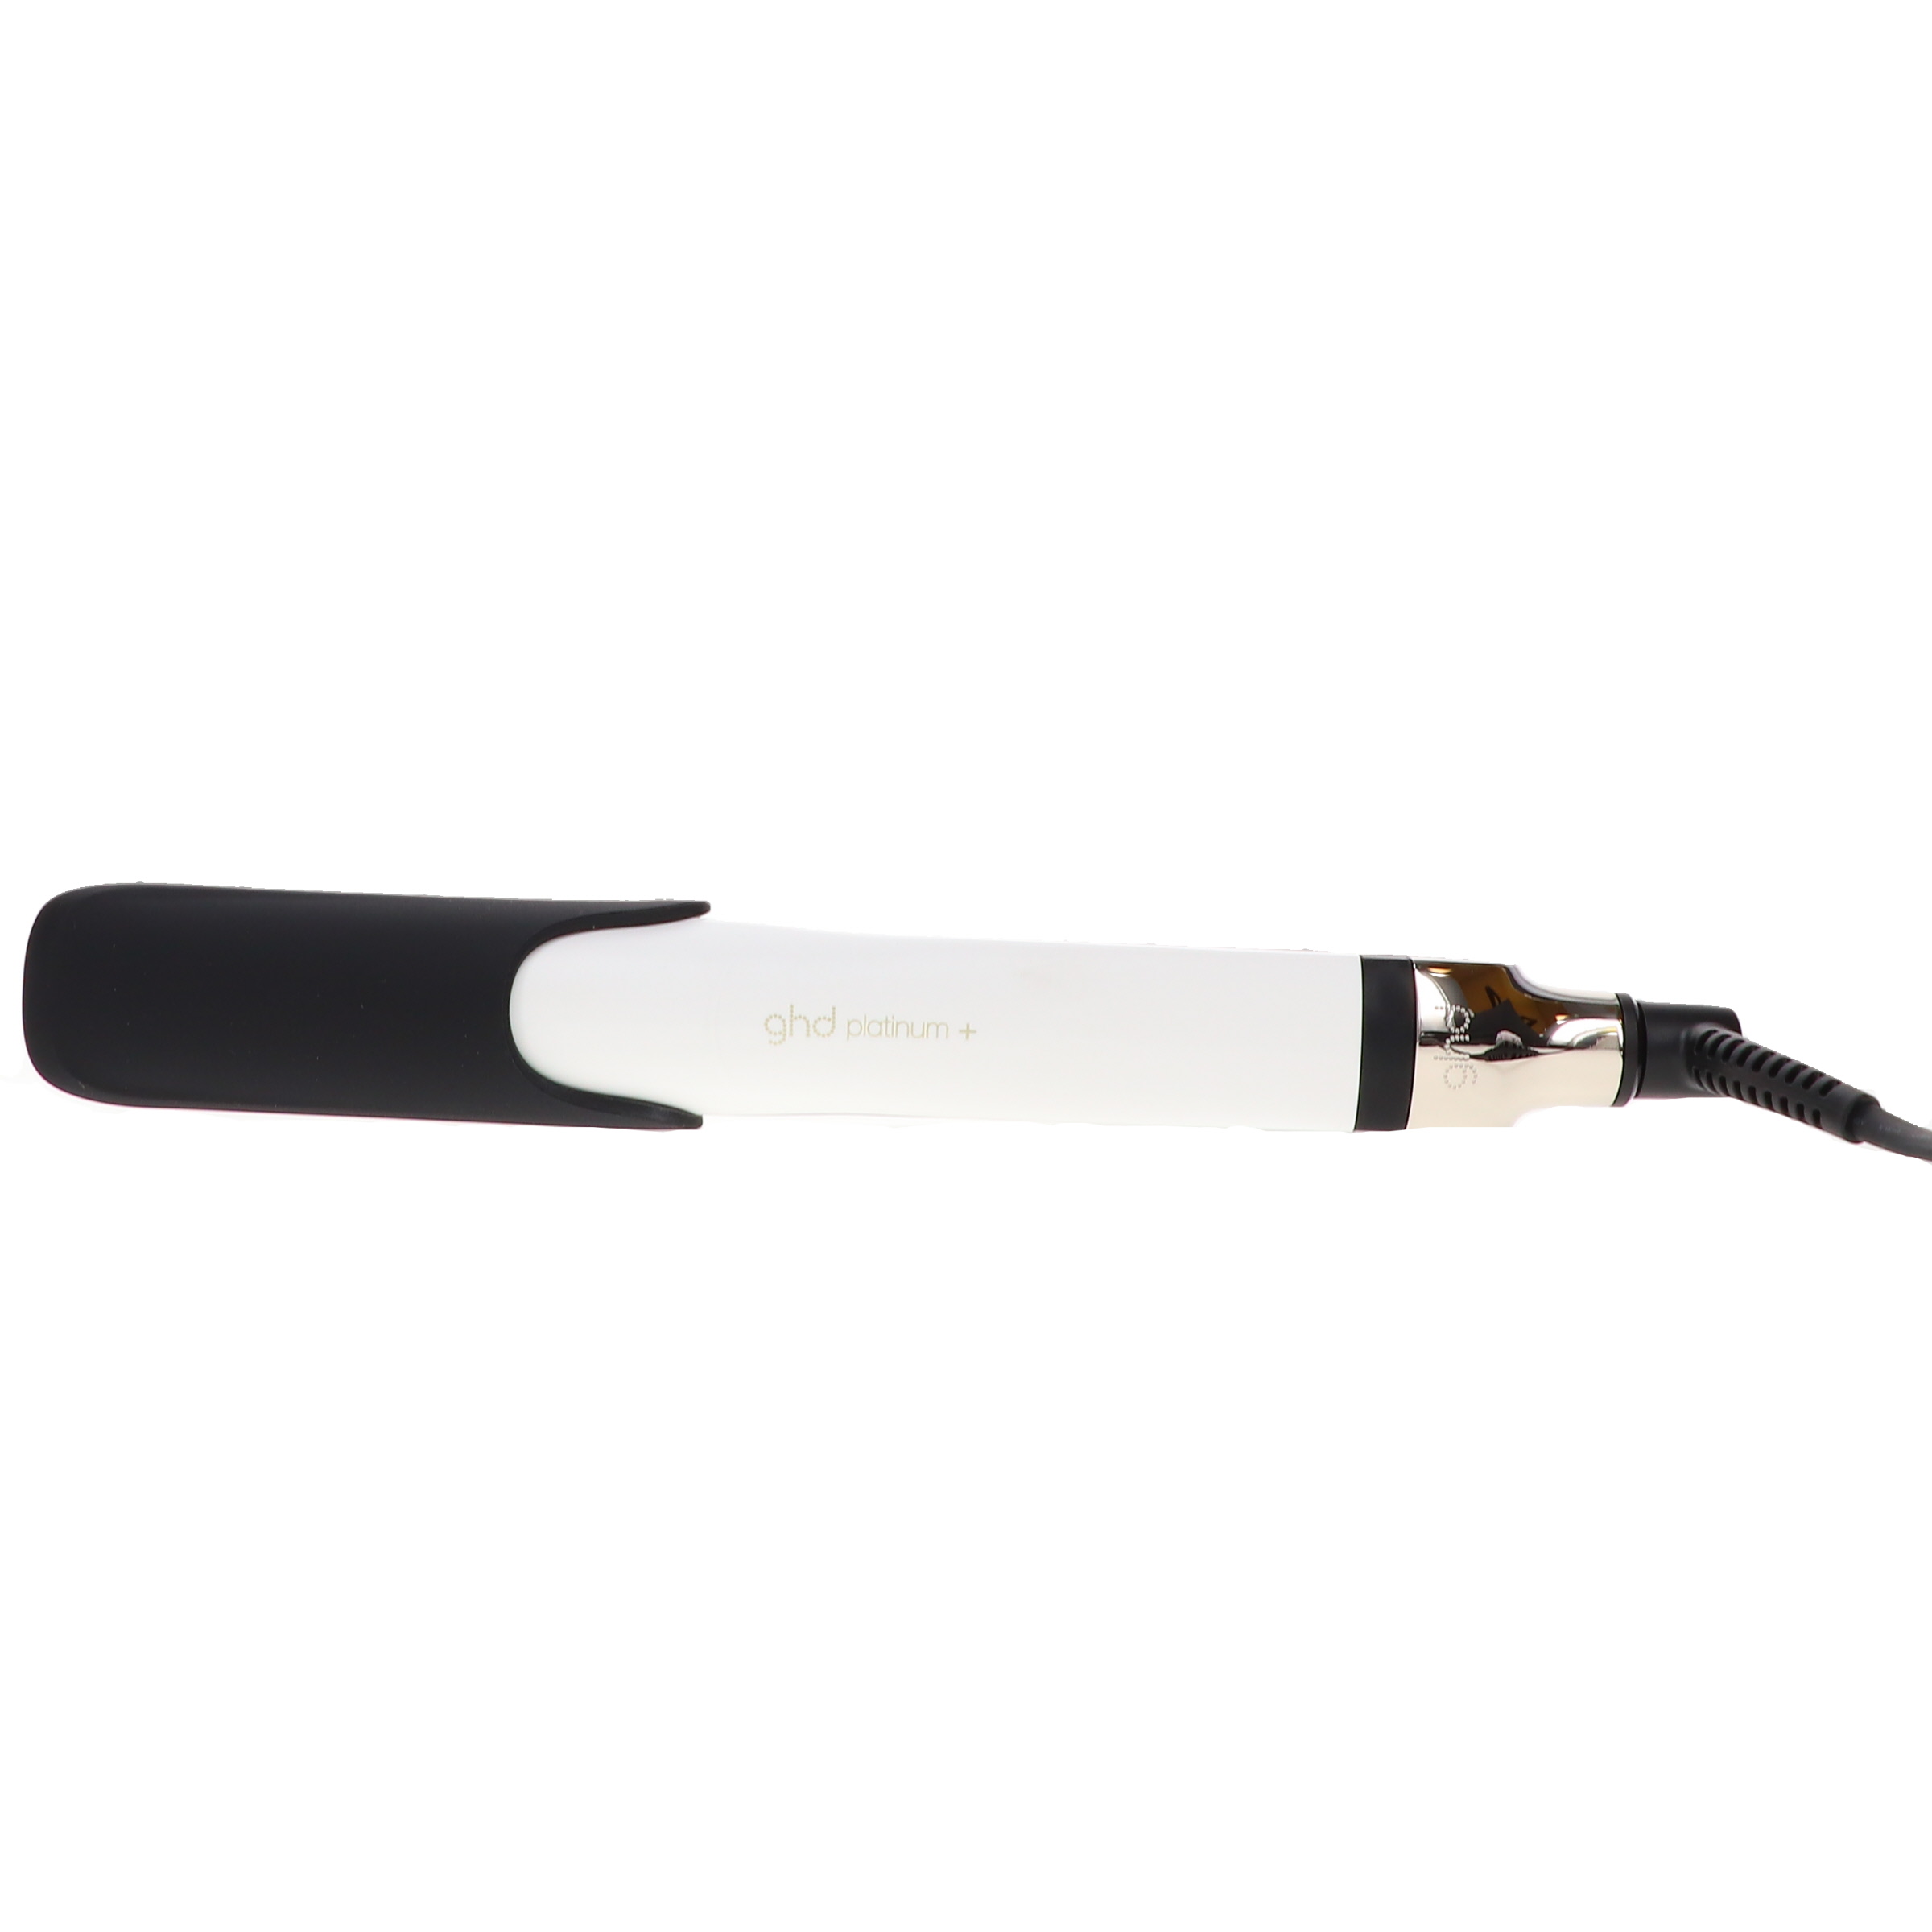 ghd Stylers Platinum + White 1 Styler - image 4 of 6